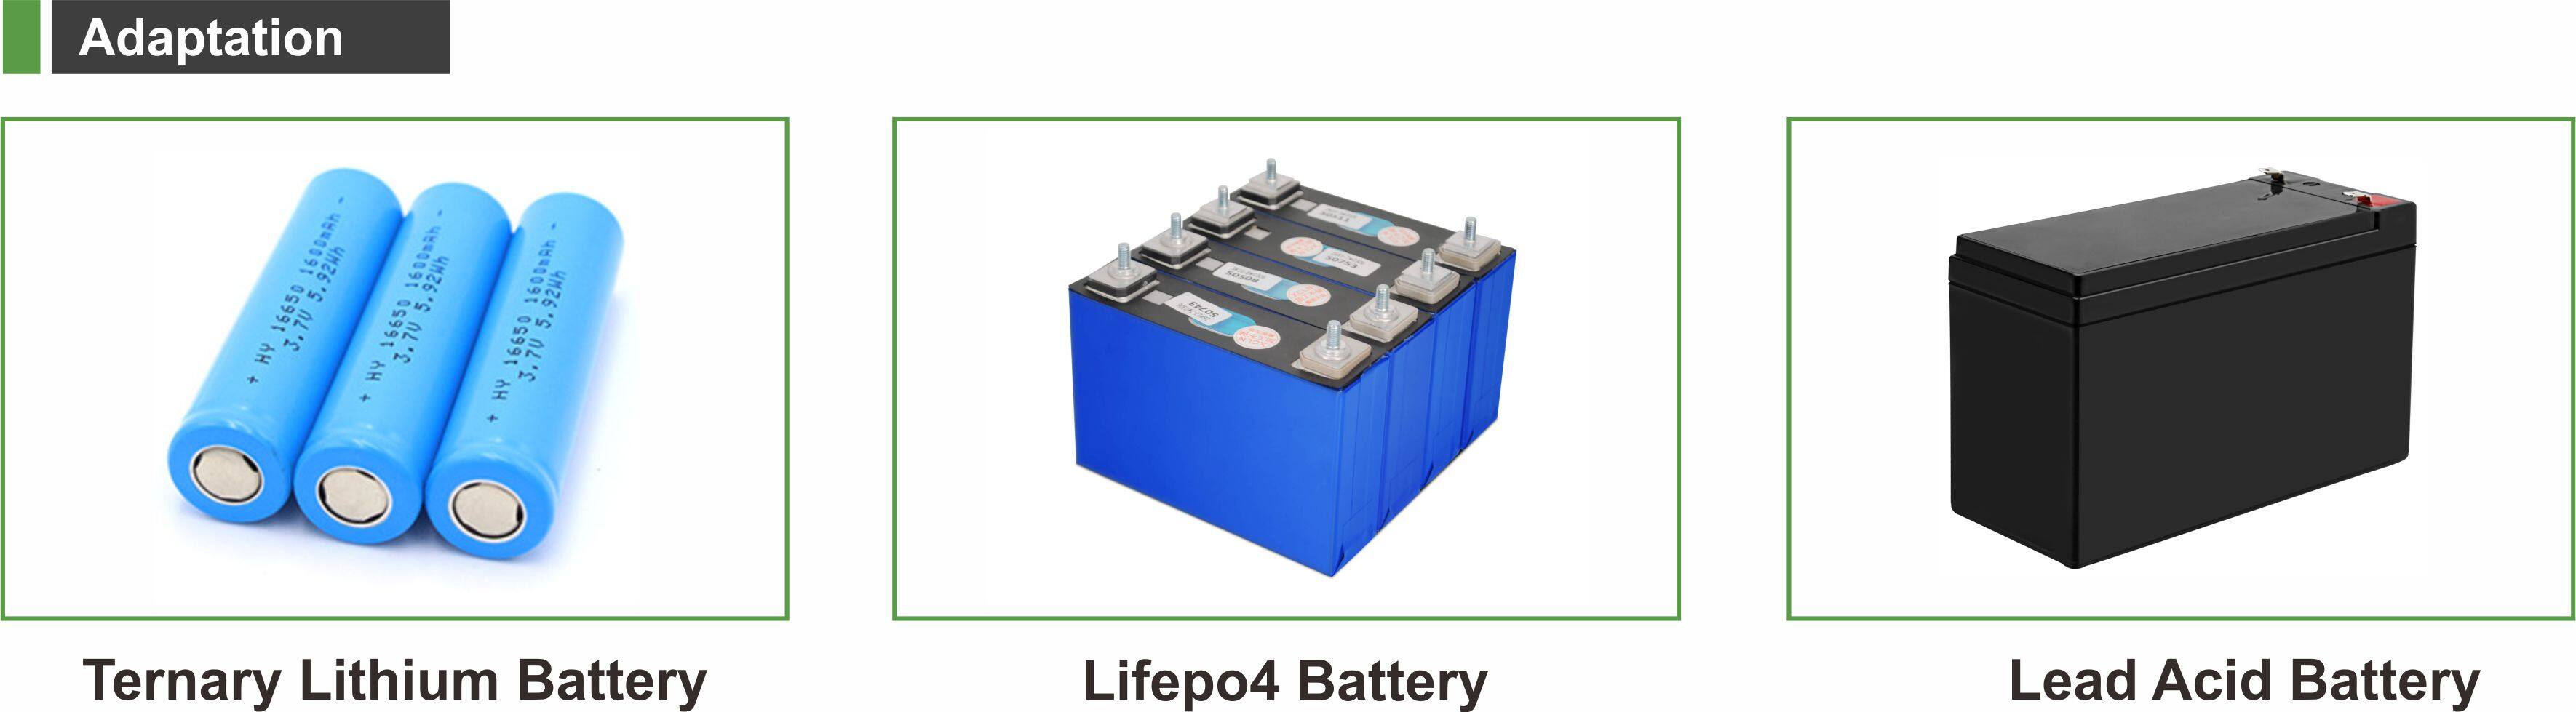 12v lithium battery with charger